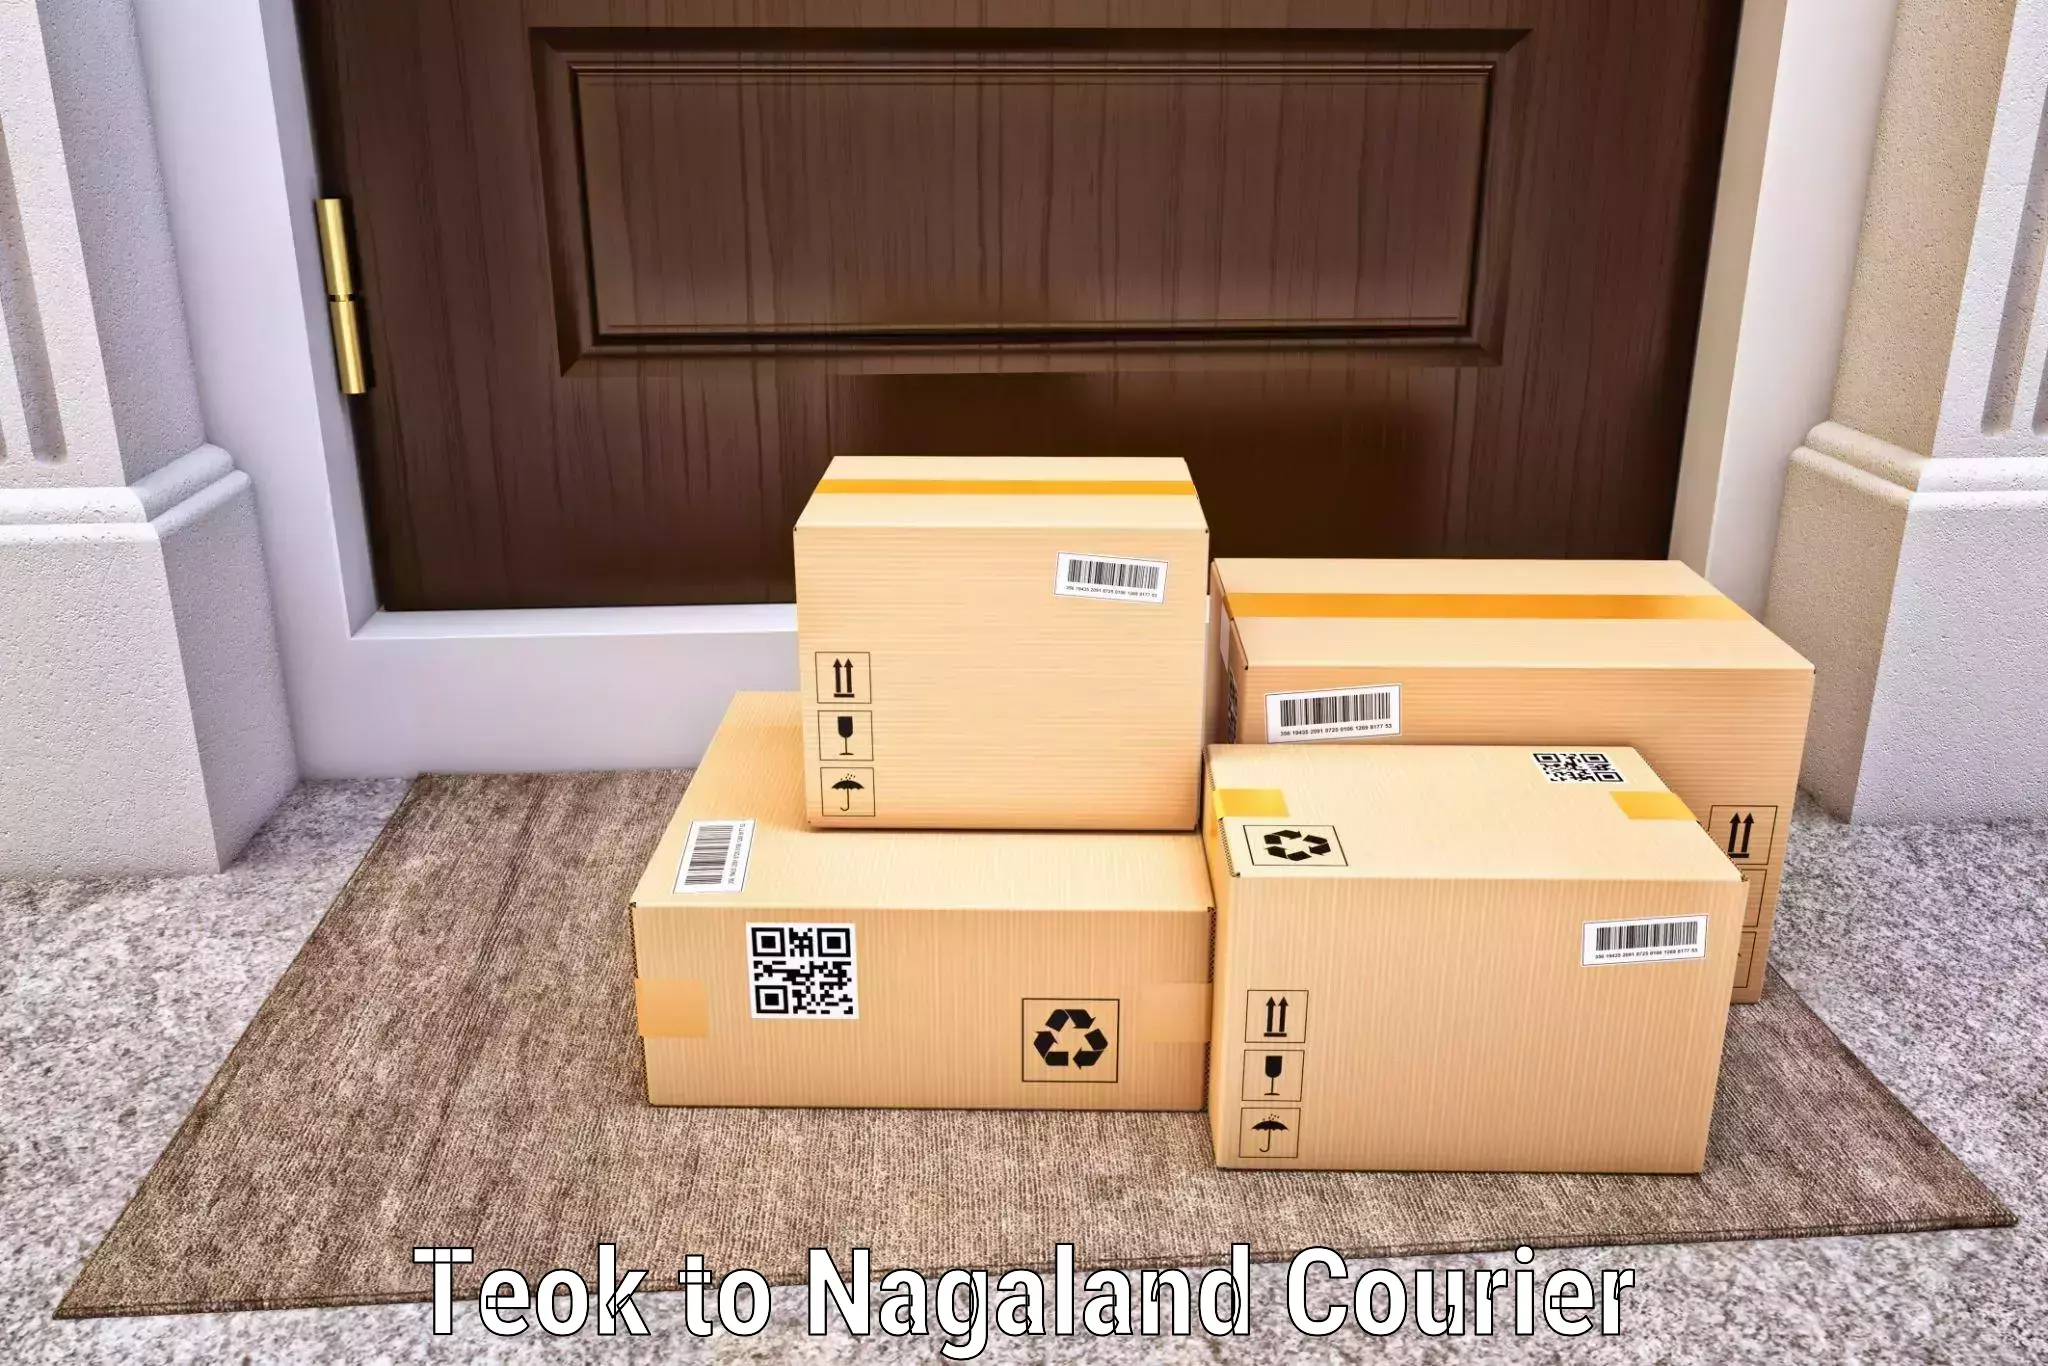 Flexible delivery schedules Teok to Nagaland